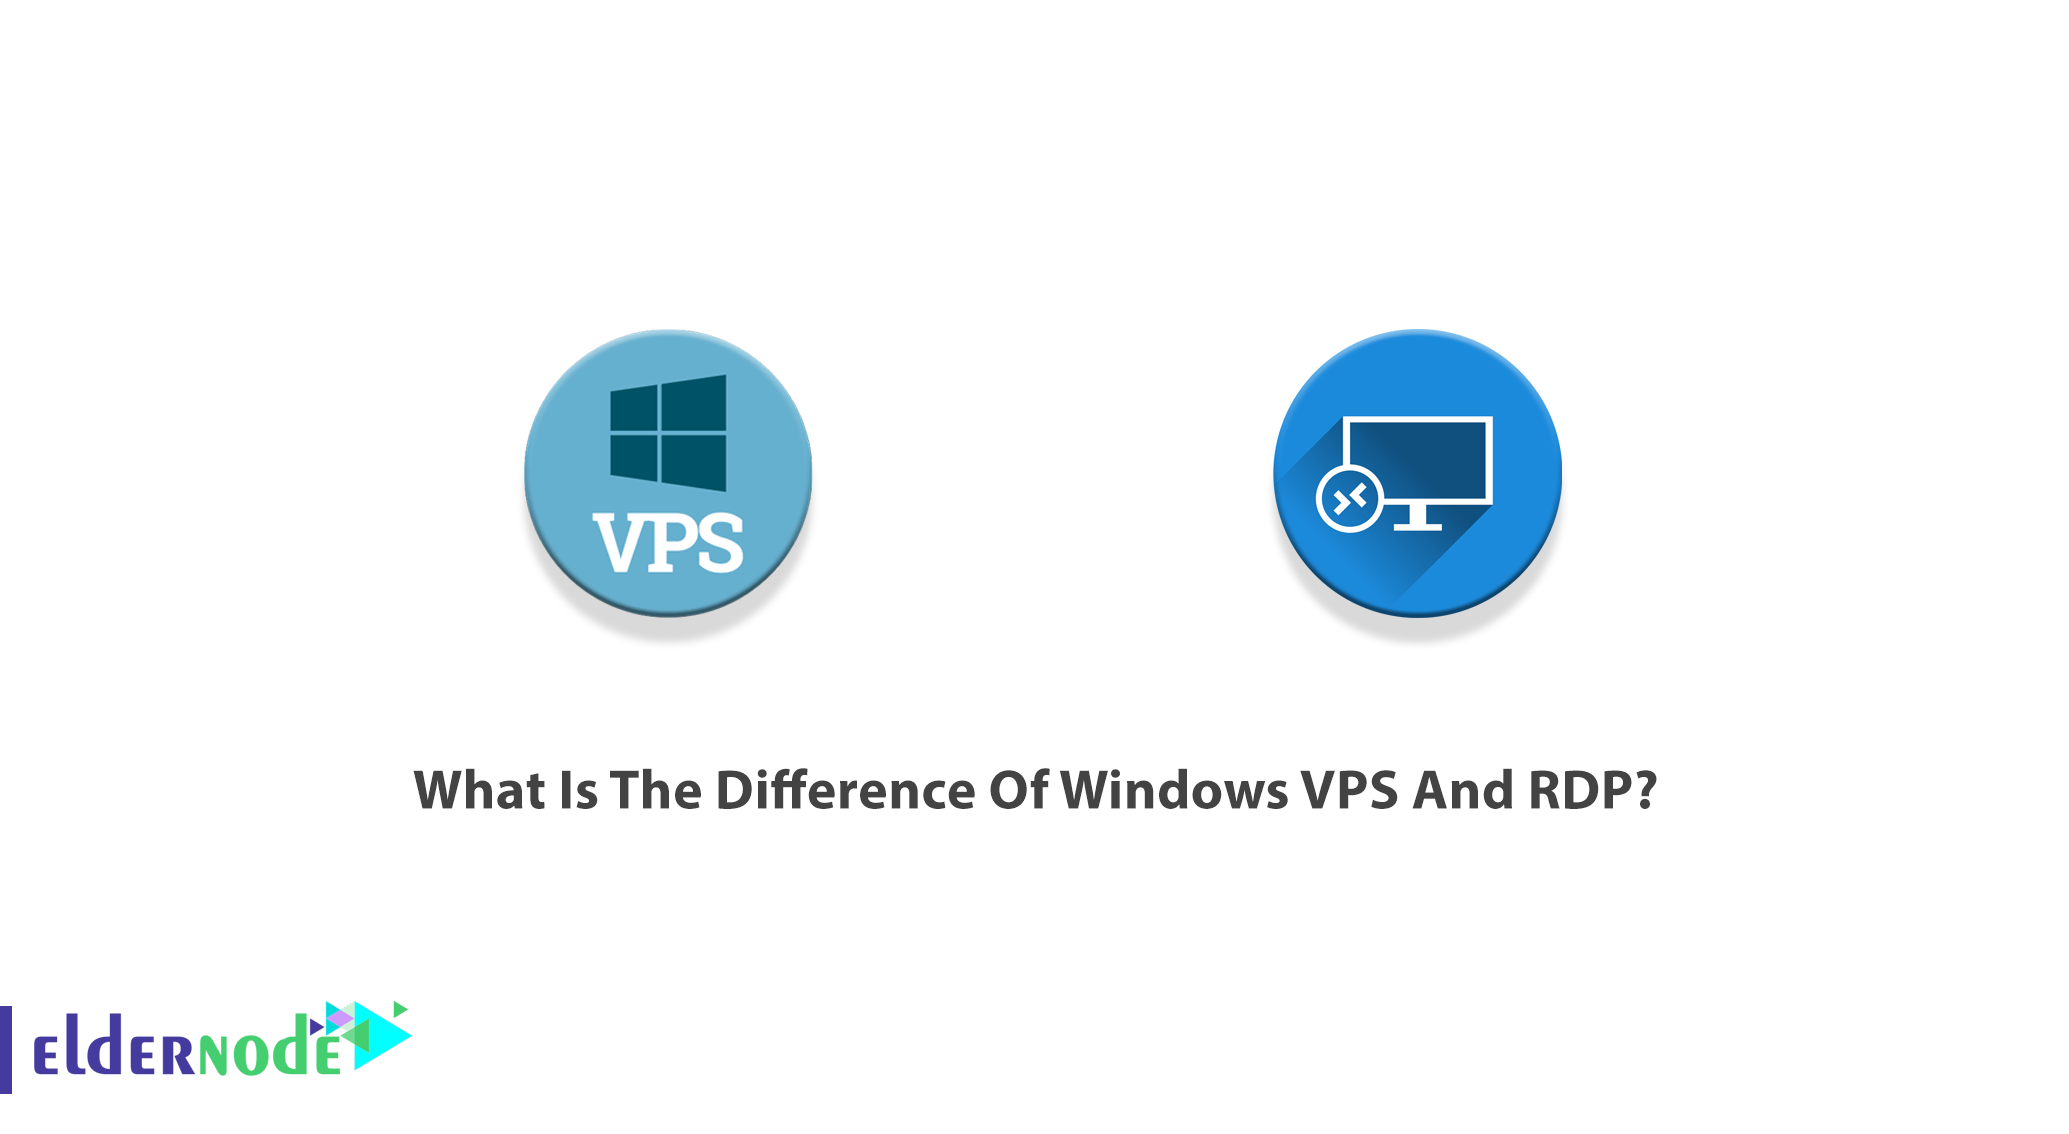 What Is The Difference Of Windows VPS And RDP